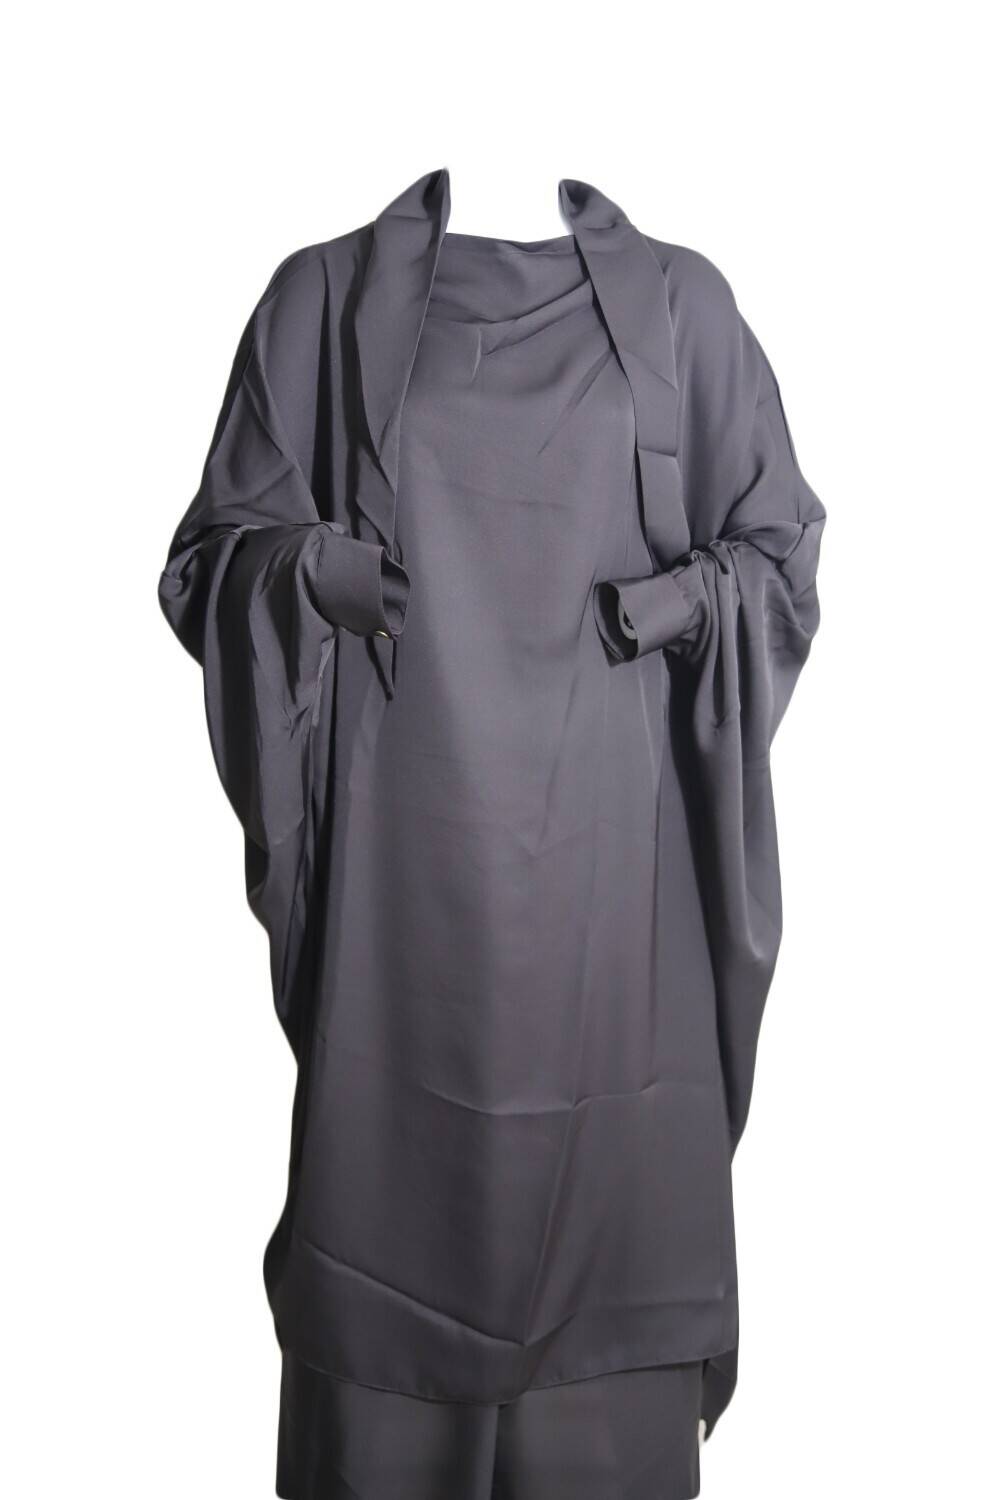 We sell jilbab in Canada. Browse our collection.